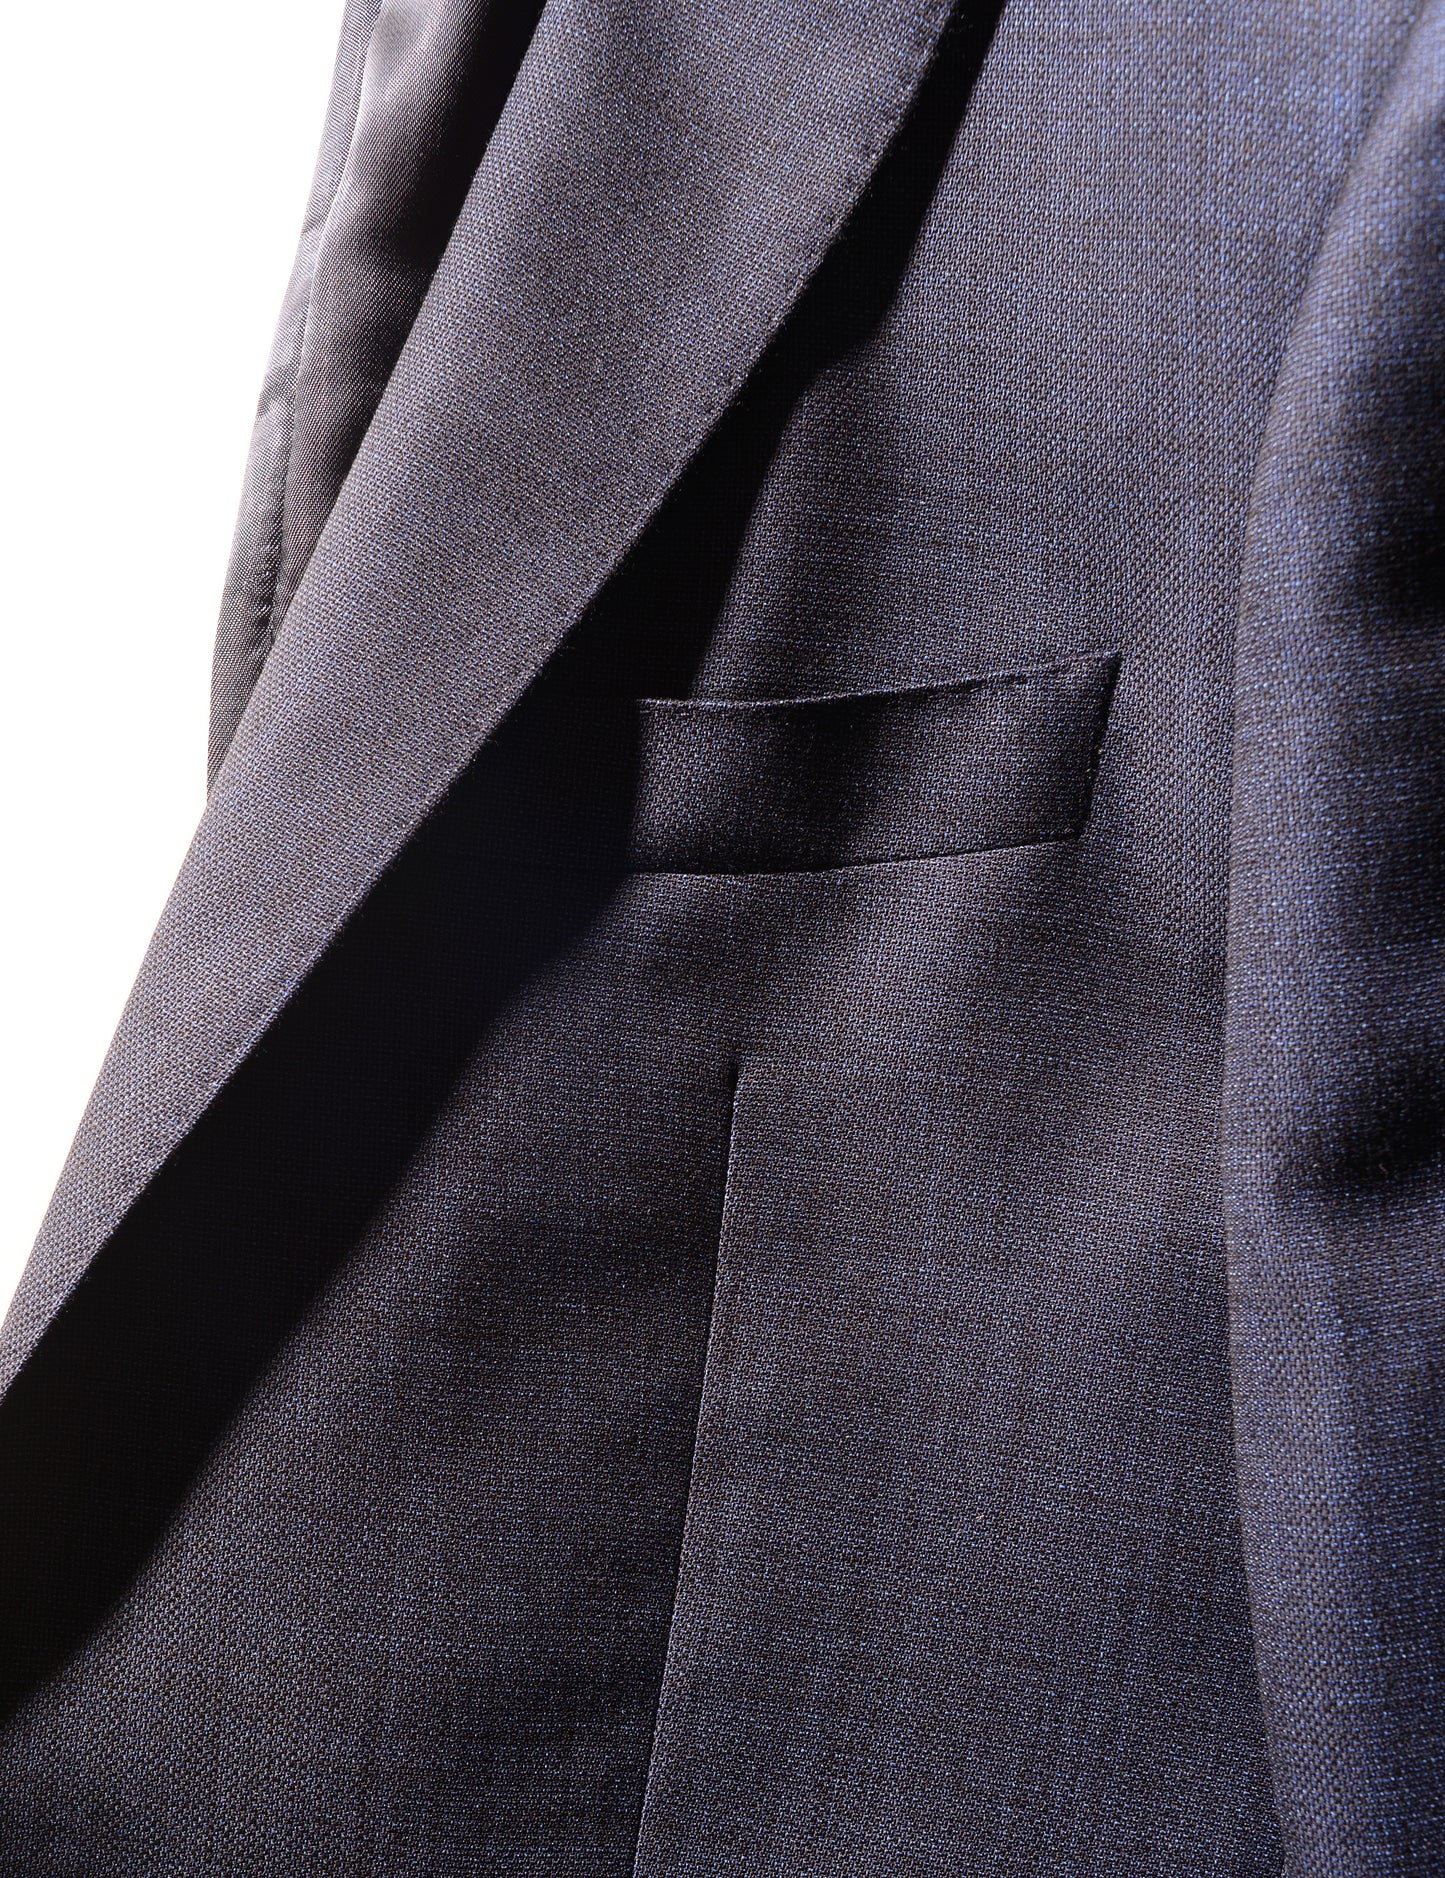 Detail shot of Brooklyn Tailors BKT50 Tailored Jacket in Textured Wool - Deep Sea showing lapel and chest pocket